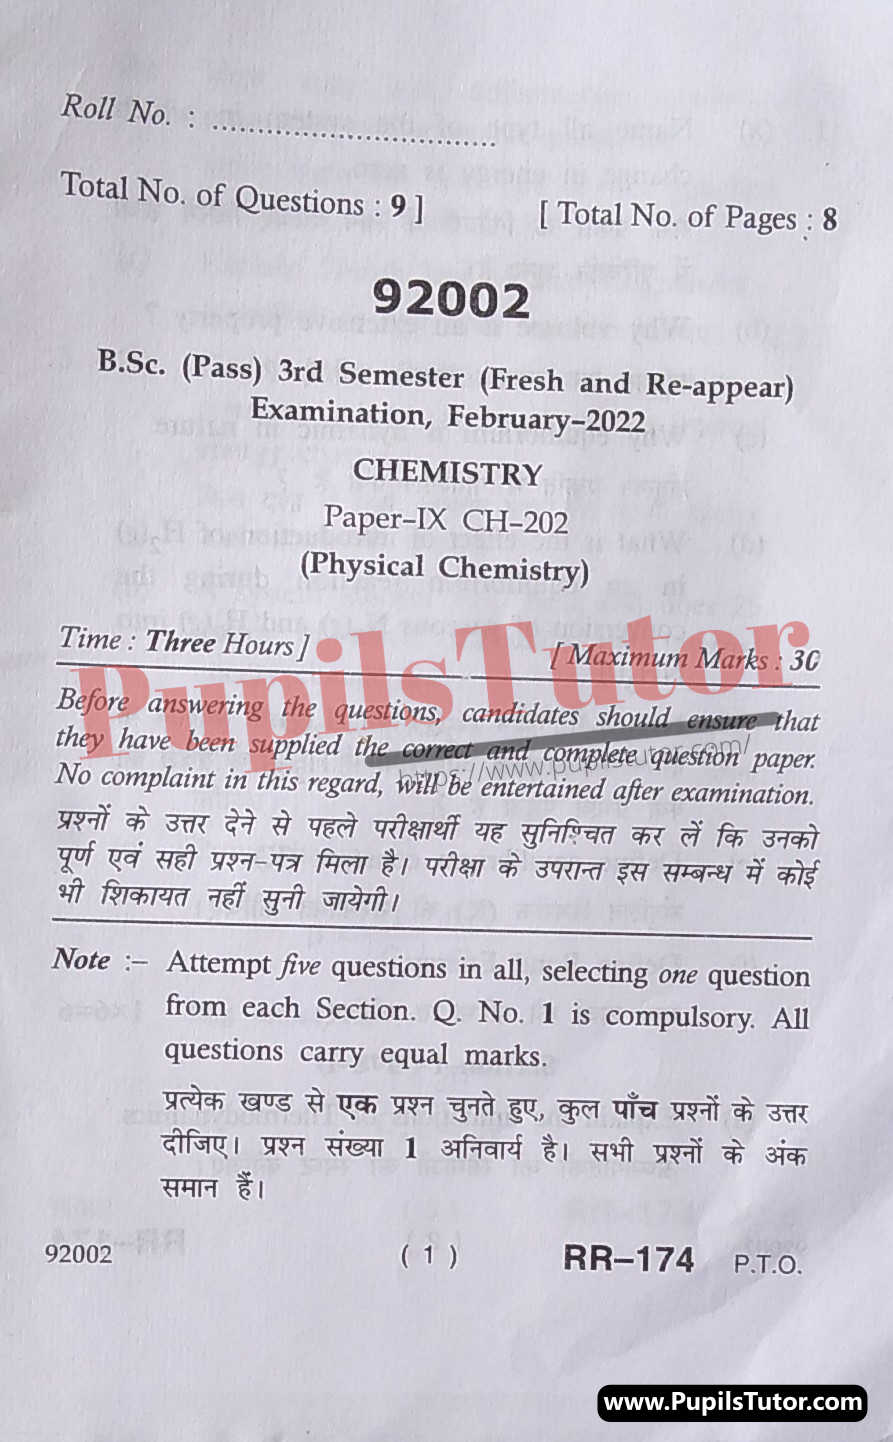 MDU (Maharshi Dayanand University, Rohtak Haryana) BSc Chemistry Pass Course Third Semester Previous Year Physical Chemistry Question Paper For February, 2022 Exam (Question Paper Page 1) - pupilstutor.com